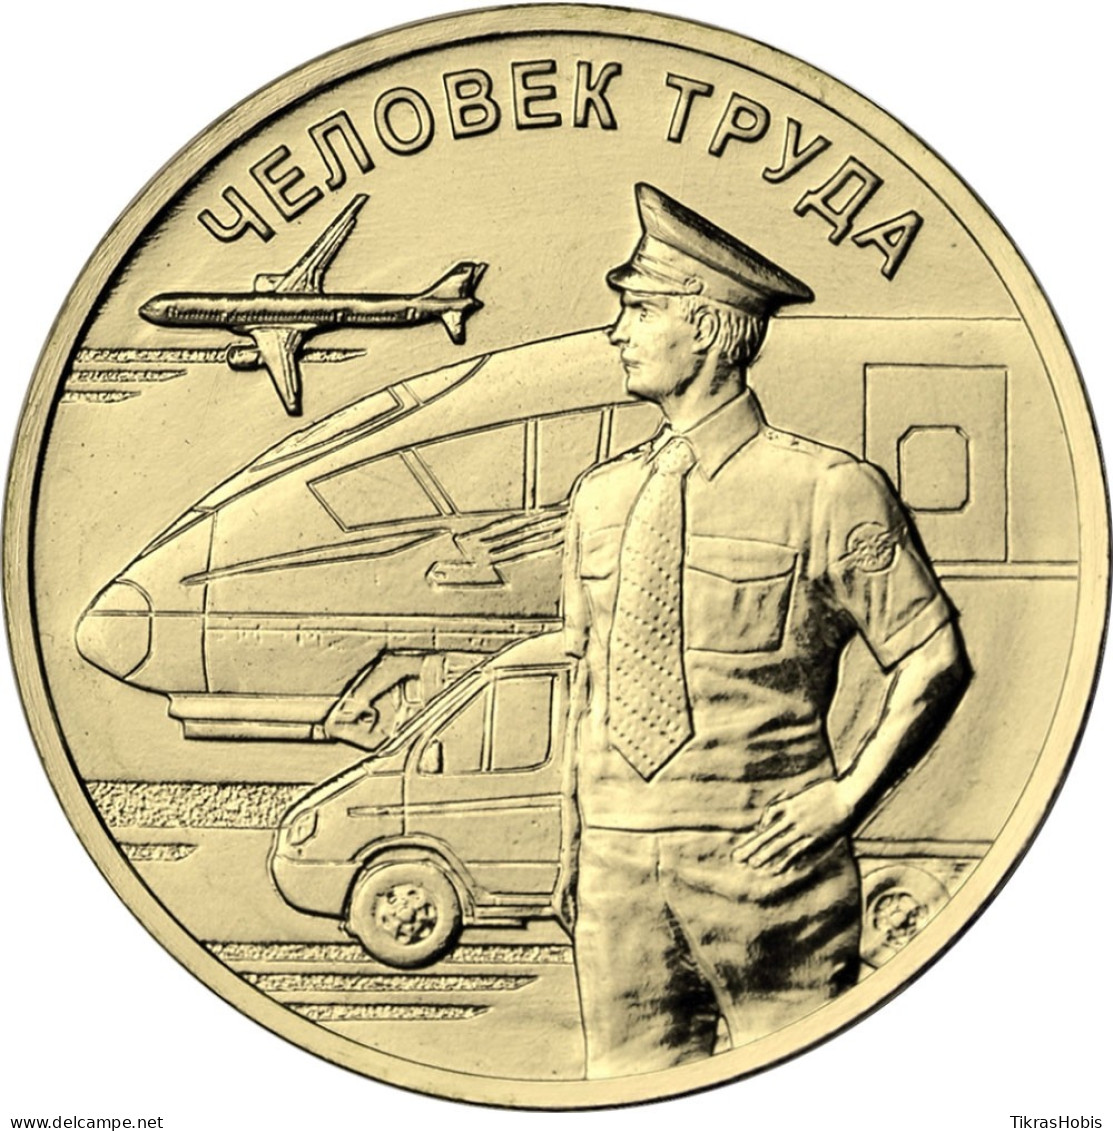 Russia 10 Rubles, 2020 Transport Worker UC1007 - Russia